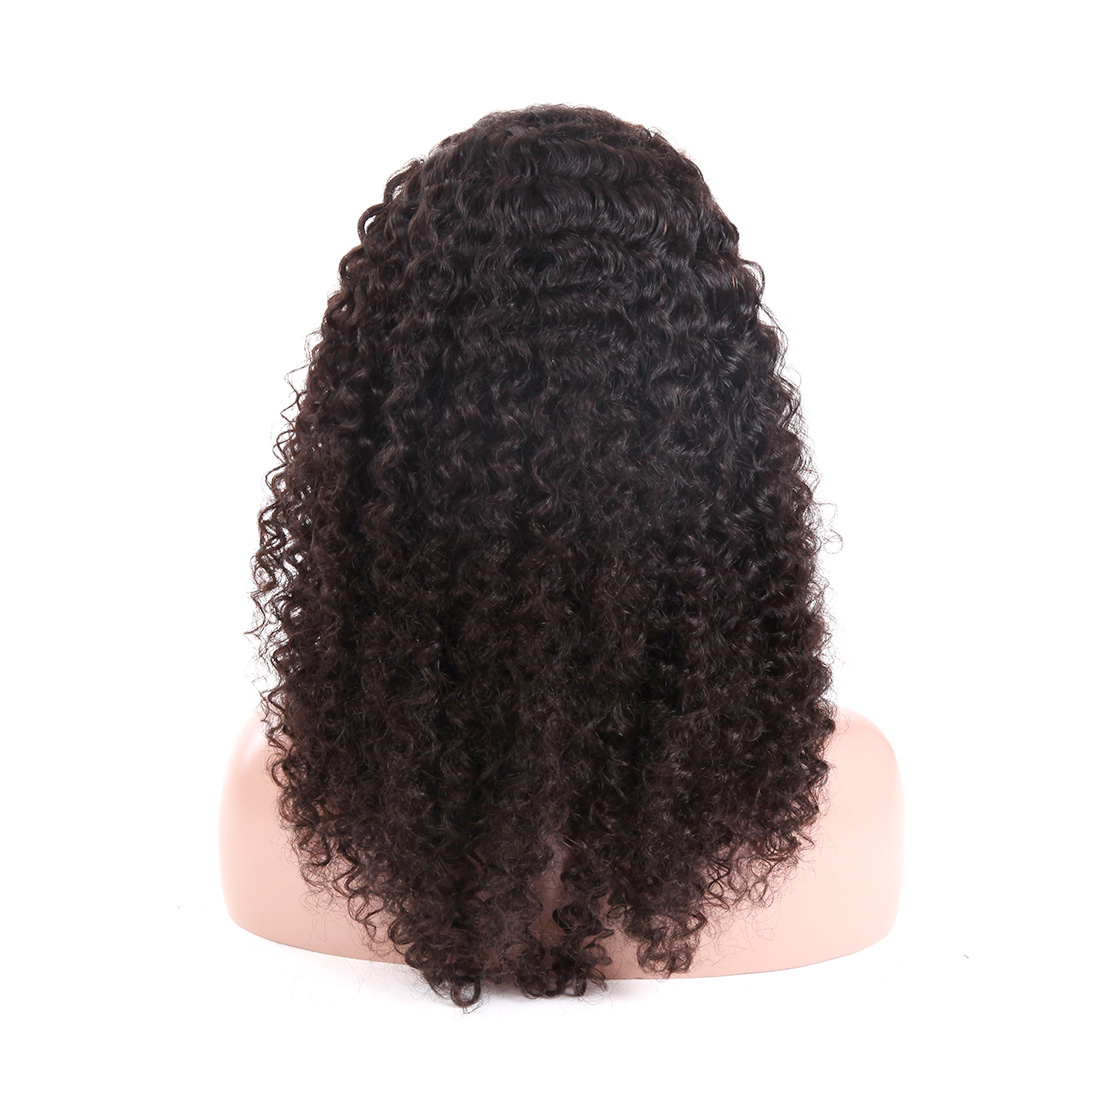 curly afro human hair wigs for black women,african american human tape hair extensions,afro kinky curly human hair bob wigs